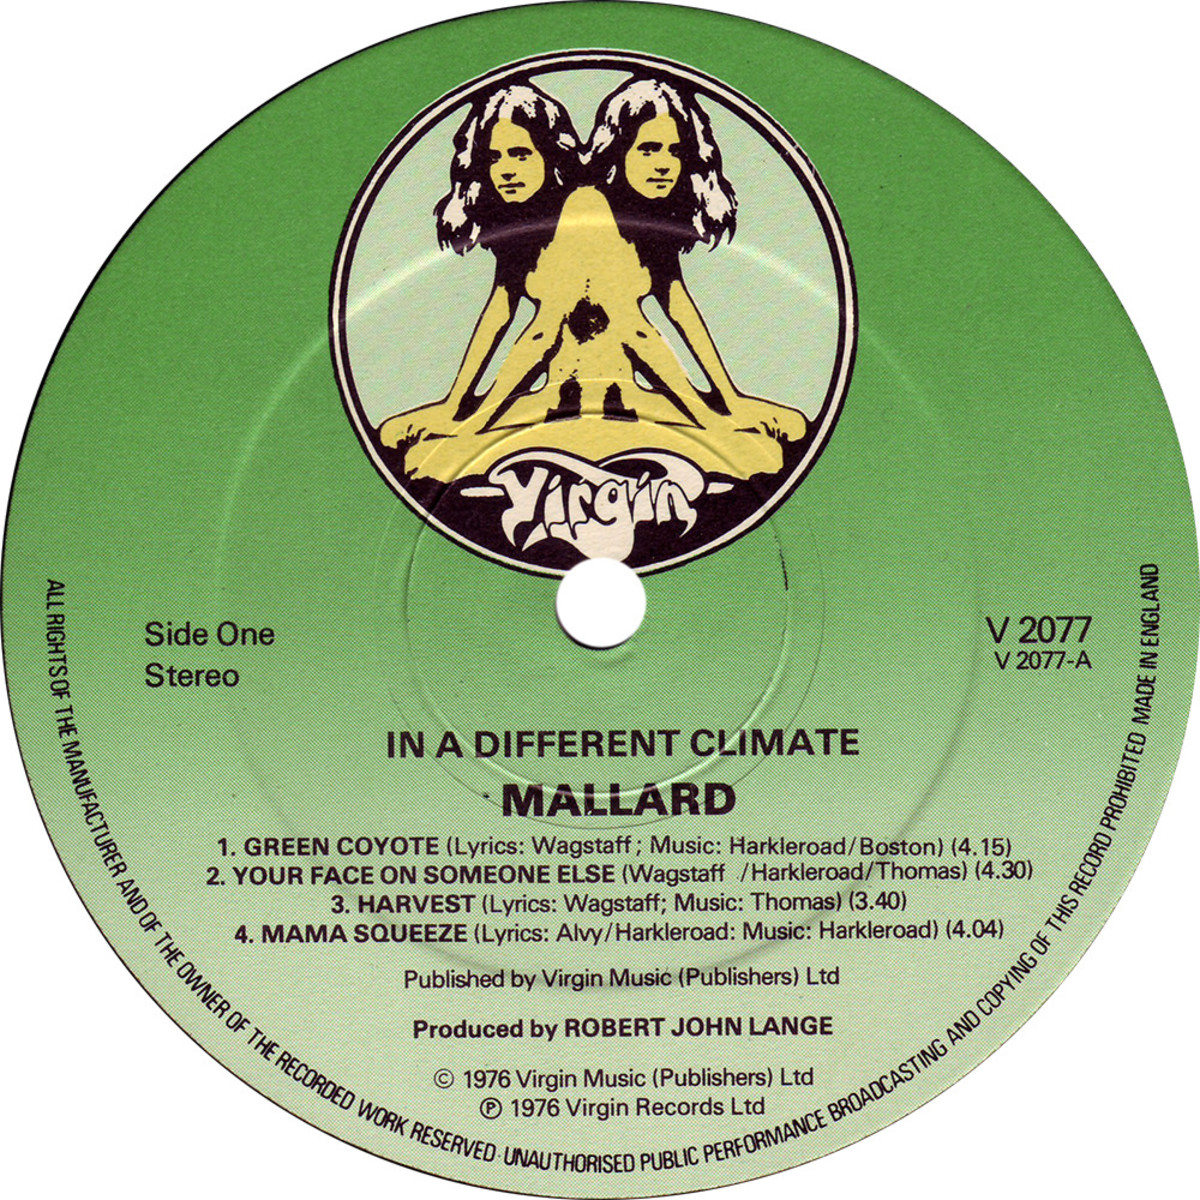 The Fourth Label Variation of the Virgin Records Twings Label